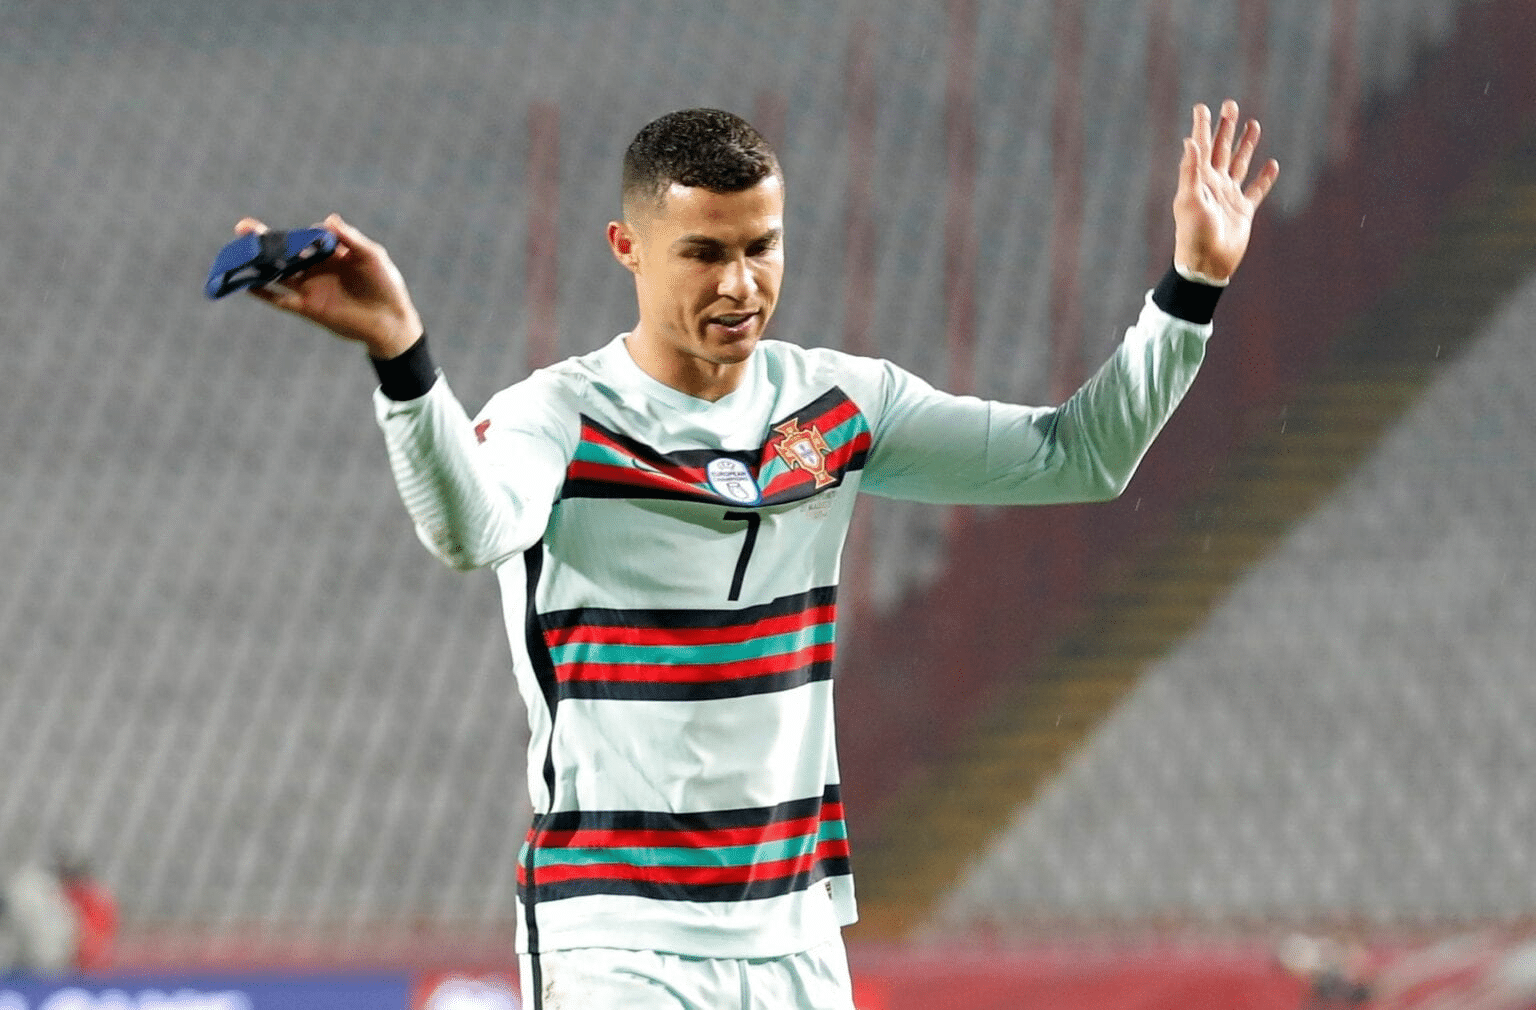 Ronaldo's Sister Defends The Star's Actions, Says 'Ronaldo & Portugal Were Robbed!'